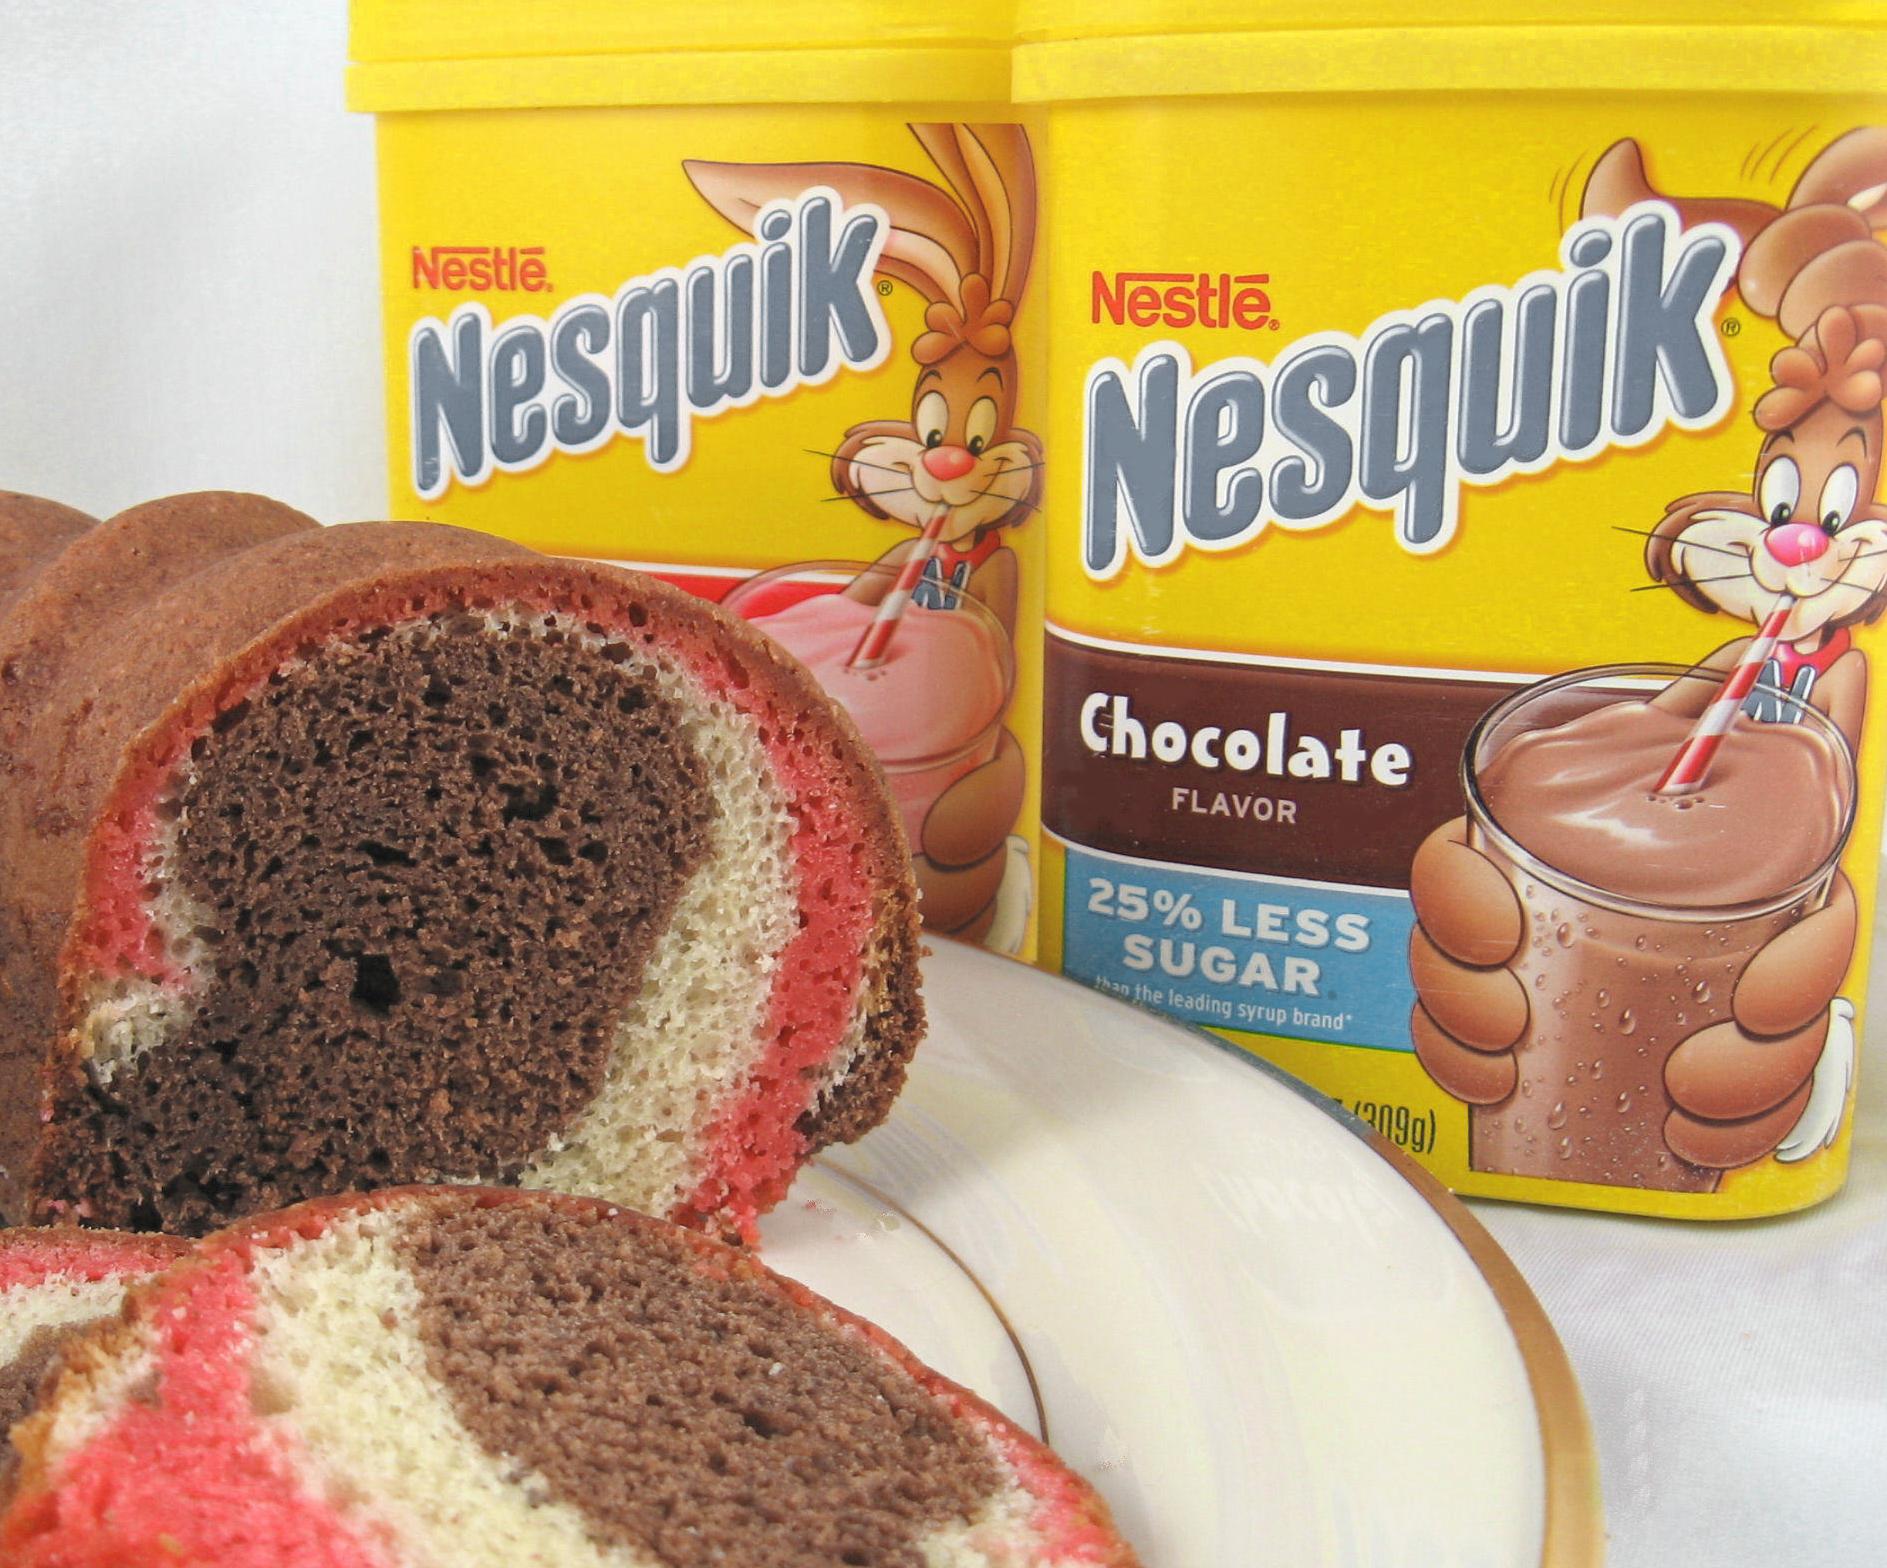  Indulge yourself in the perfect combination of chocolate, vanilla, and strawberry in a slice of this Neapolitan Pound Cake.